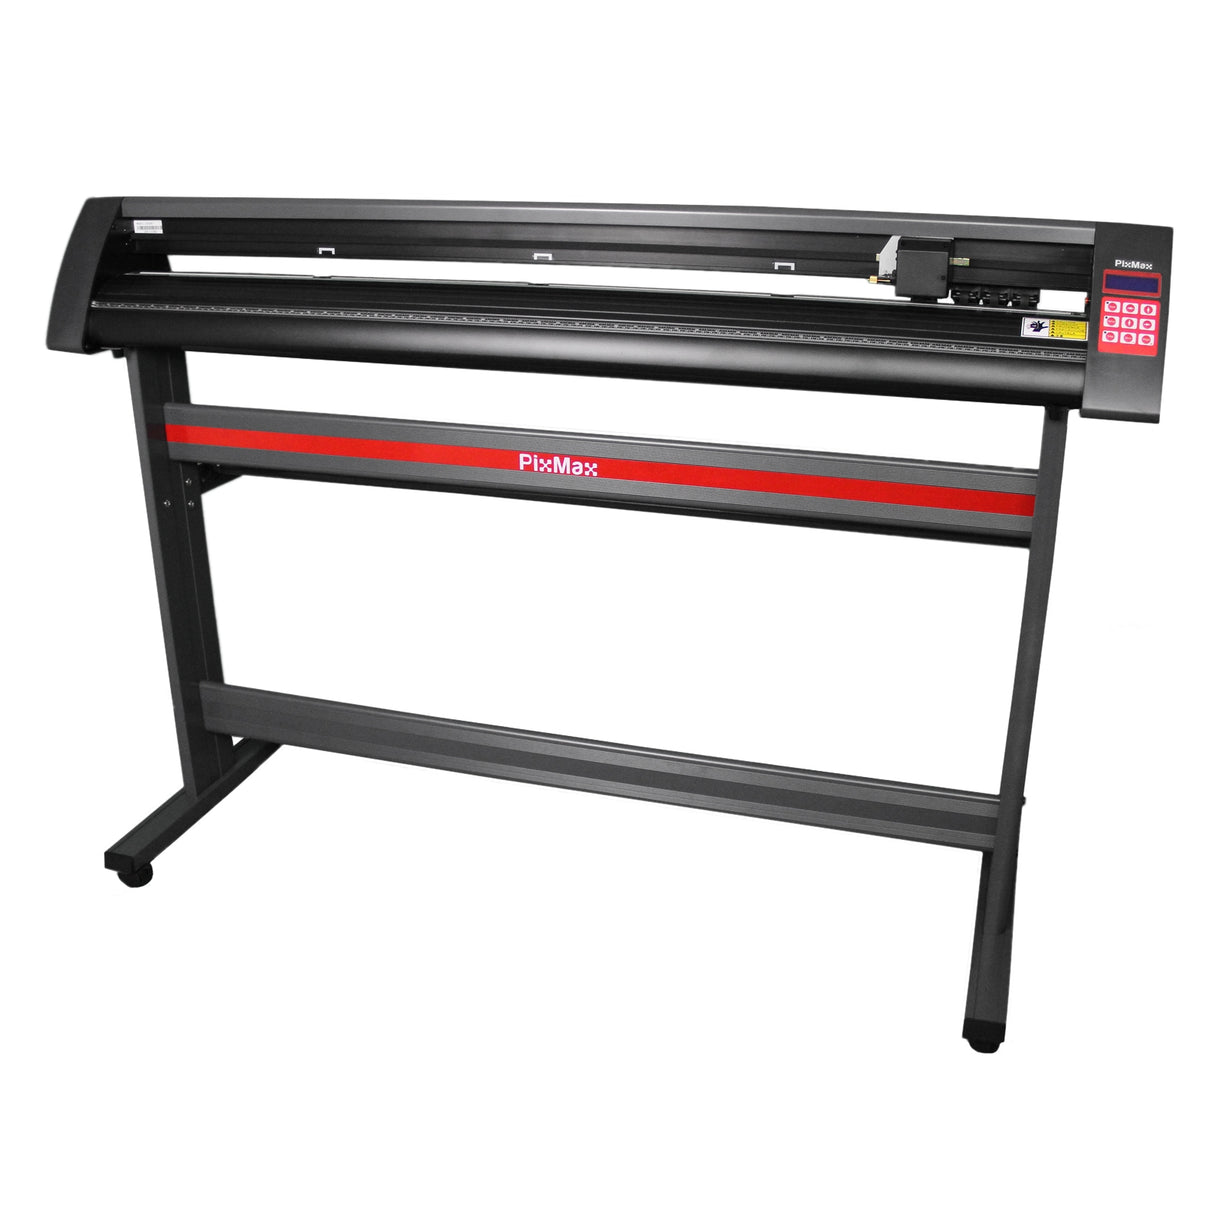 1350 Vinyl Cutter with Stand, Signcut pro & LED Light Guide